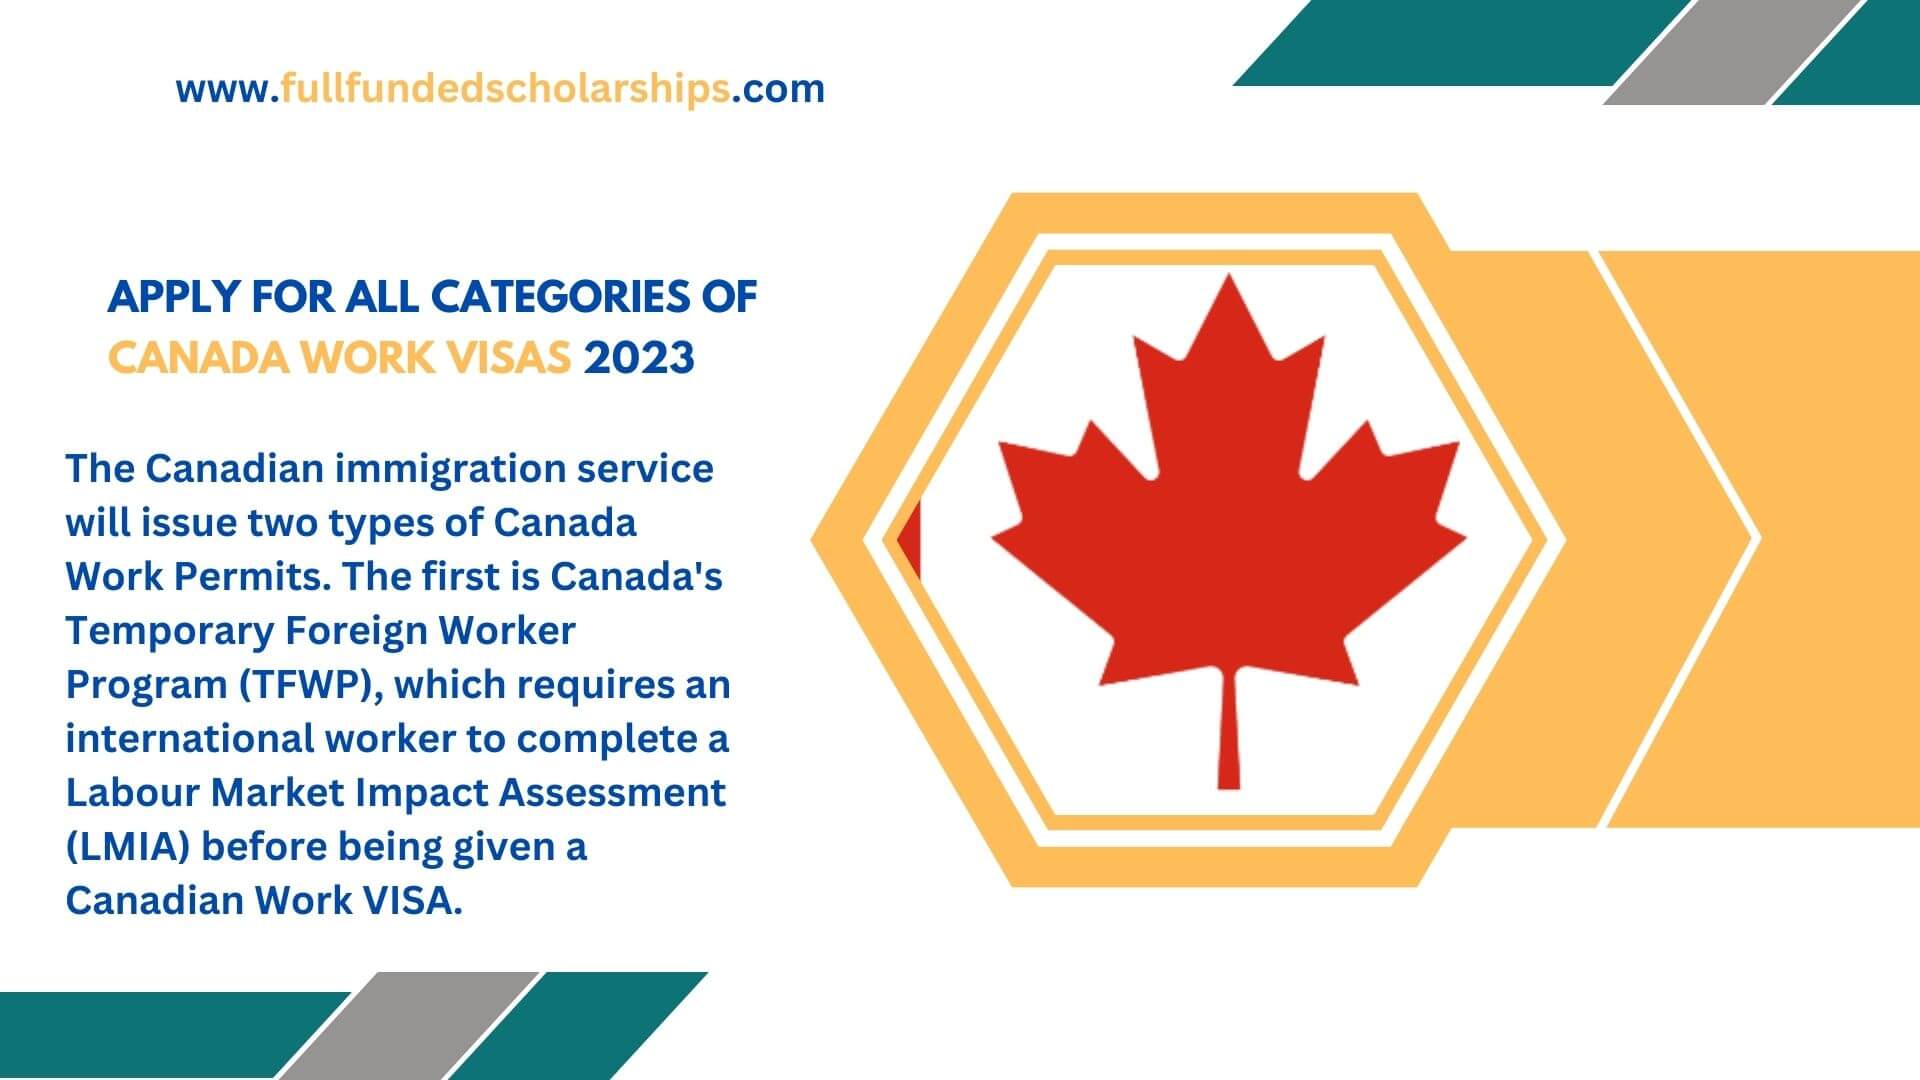 Apply for all Categories of Canada Work Visas 2023